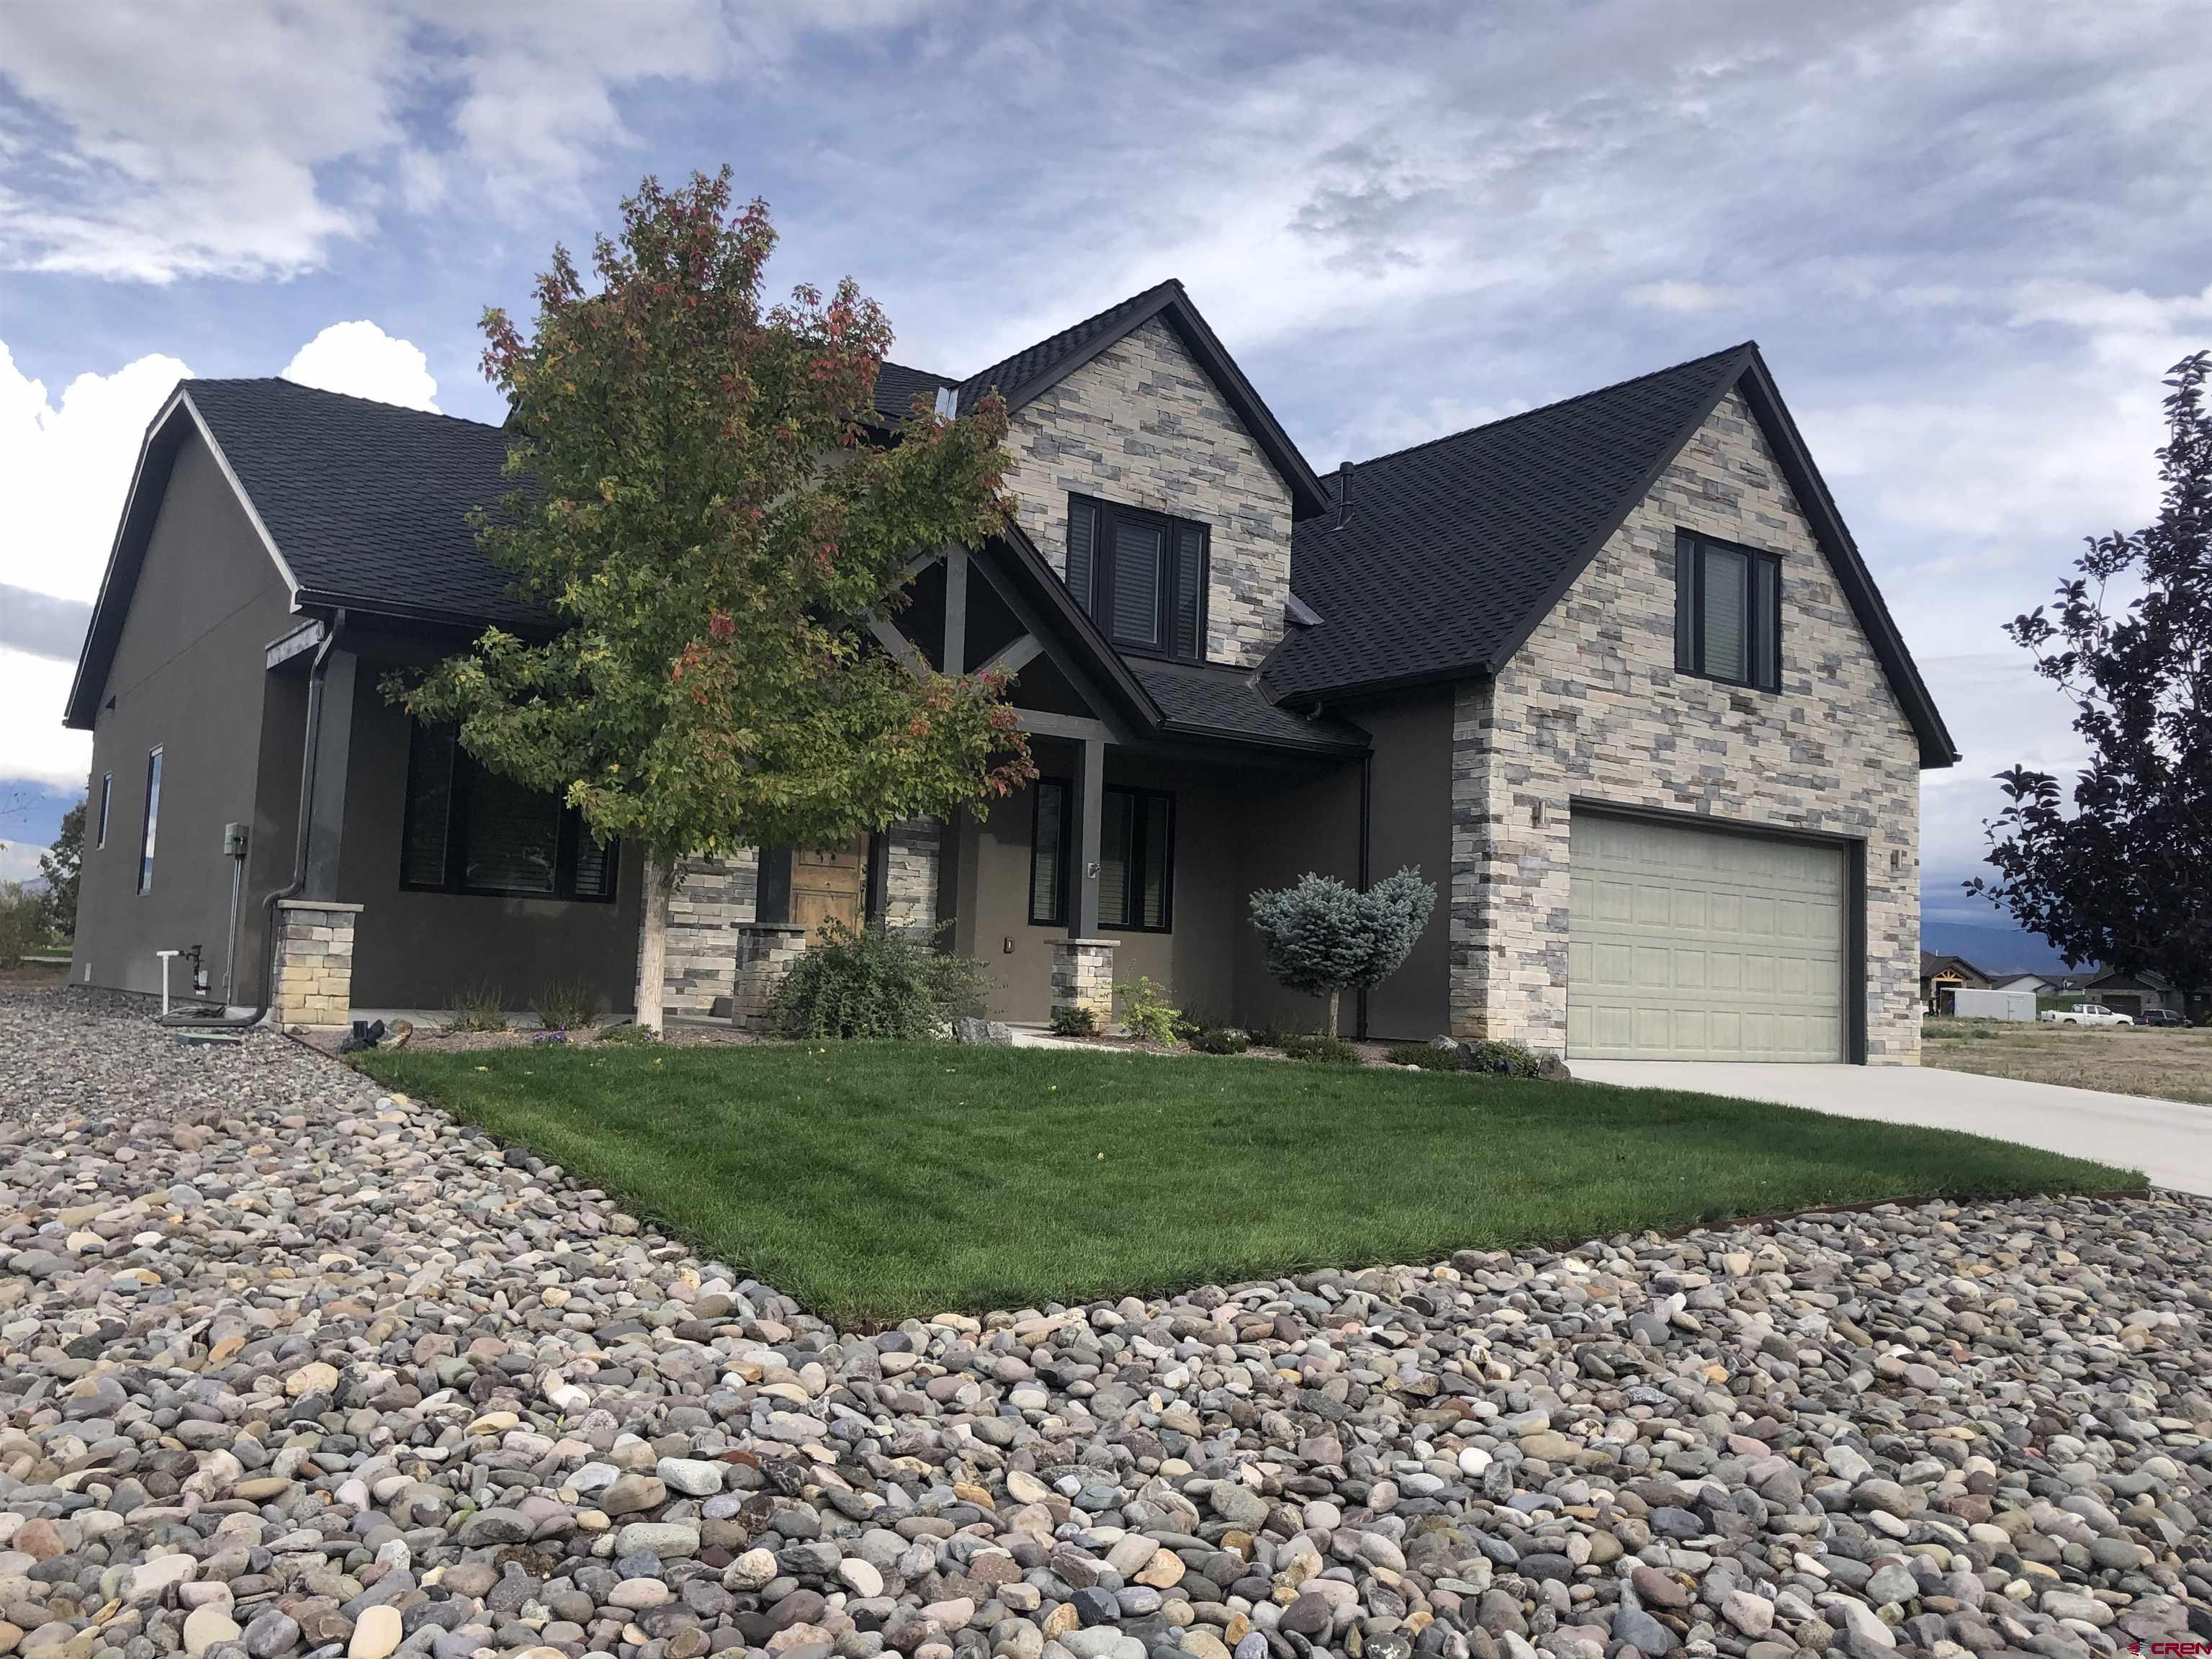 This wonderful home is located in The Bridges Golf Course community, great views! Built in 2016 with beautiful upgrades and kept in immaculate condition. Close to shopping, downtown Montrose and minutes from the Clubhouse and Remington's Restaurant. The Main level design provides for a spacious 17' ceiling, gas fireplace, and views of the golf course and mountains. The kitchen is efficient and features wood dovetail drawers and cabinets with soft close hinges, solid counter surface to cabinet glass tile back splash, recessed lighting. The kitchen eating space offers a bar counter for chairs. This area is located just off the partially covered deck overlooking the landscaped yard before the golf course and mountain views.   The source for all measurements and/or dimensions were obtained from the County records/City record/ utility providers and HOA and are deemed to be reliable and should be verified by buyer and/or agent. All room sq. ft. dimensions are rounded and should be verified buy buyer/agent. The upper bedroom called the fourth bedroom is without a built-in closet and would serve well as an office or playroom/hobby room however is referred to as a bedroom from the county assessor records.